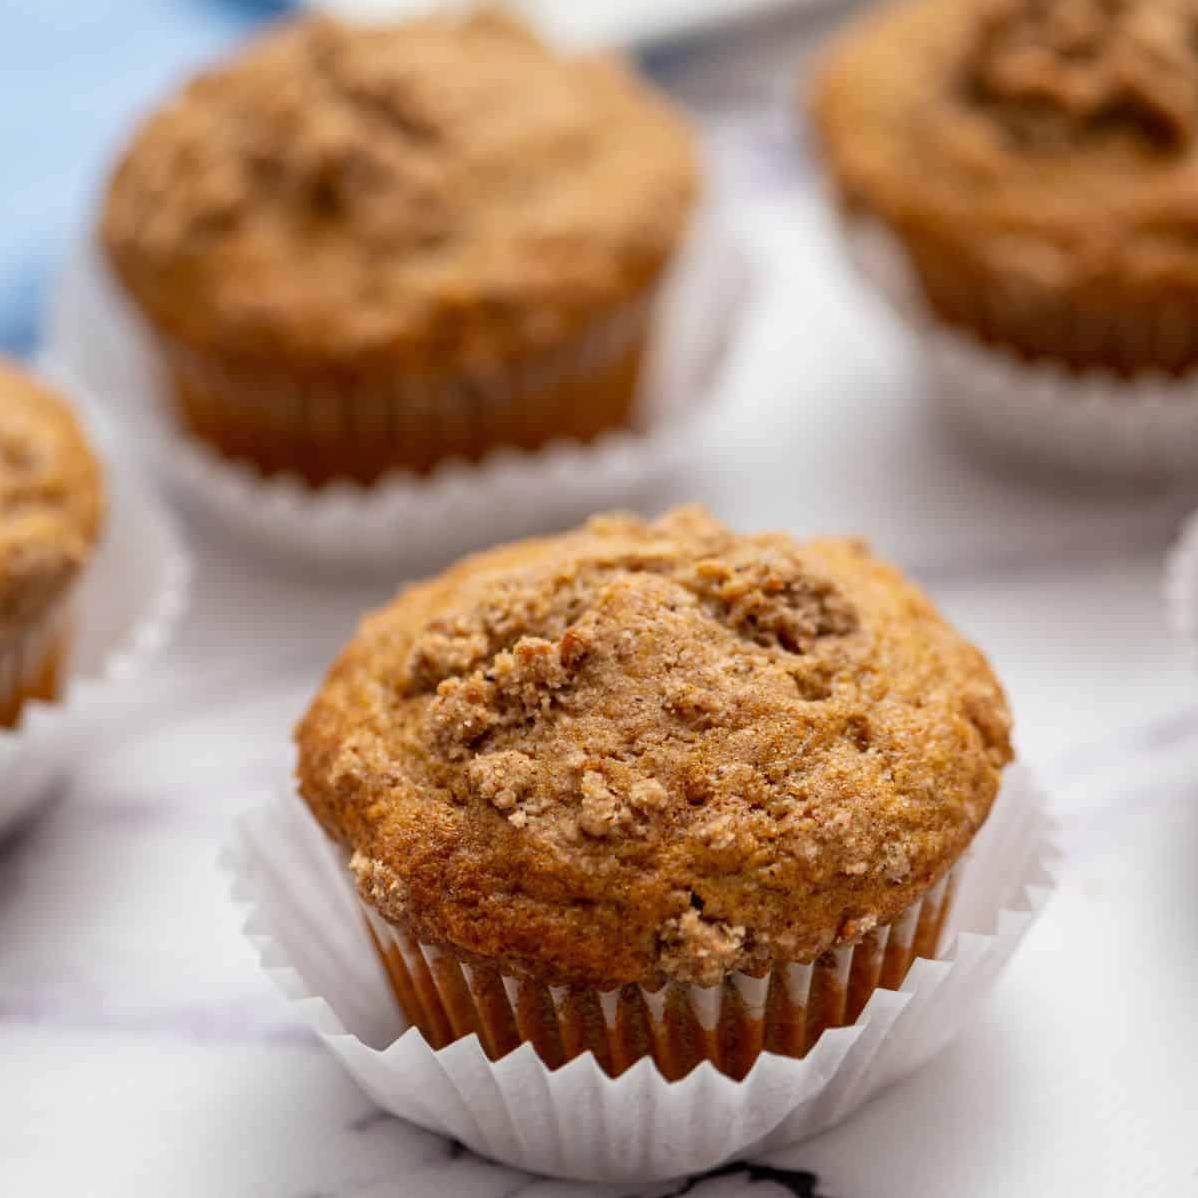  Looking for a gluten-free treat that won't leave you feeling guilty? These muffins are just what you need.